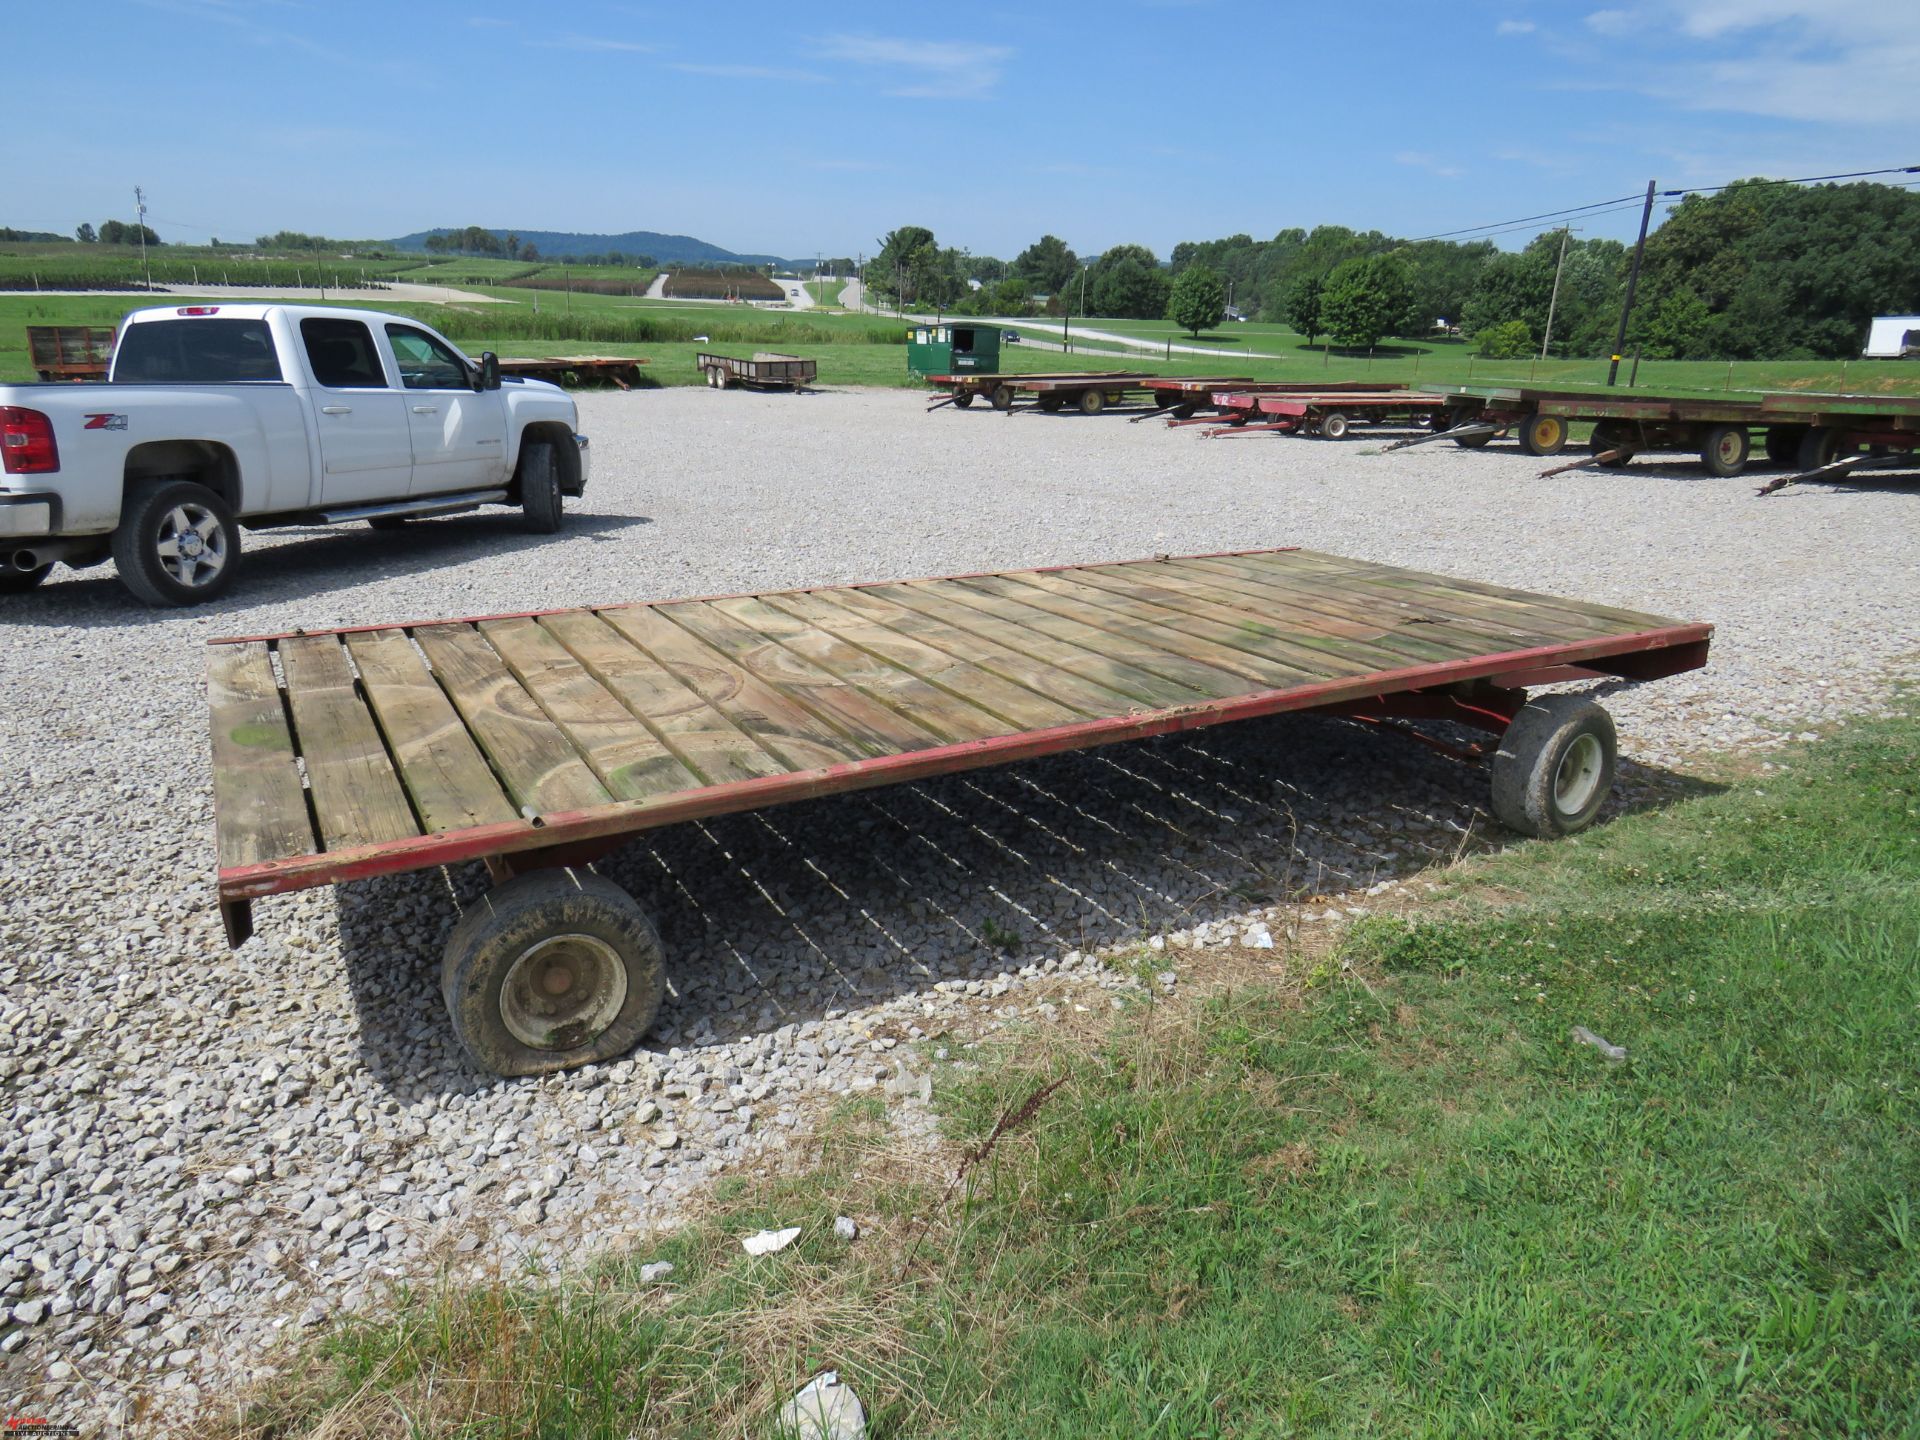 EZ TRAIL FLAT BED TRAILER, 15', PIN HITCH, SMALL TIRES - Image 3 of 6